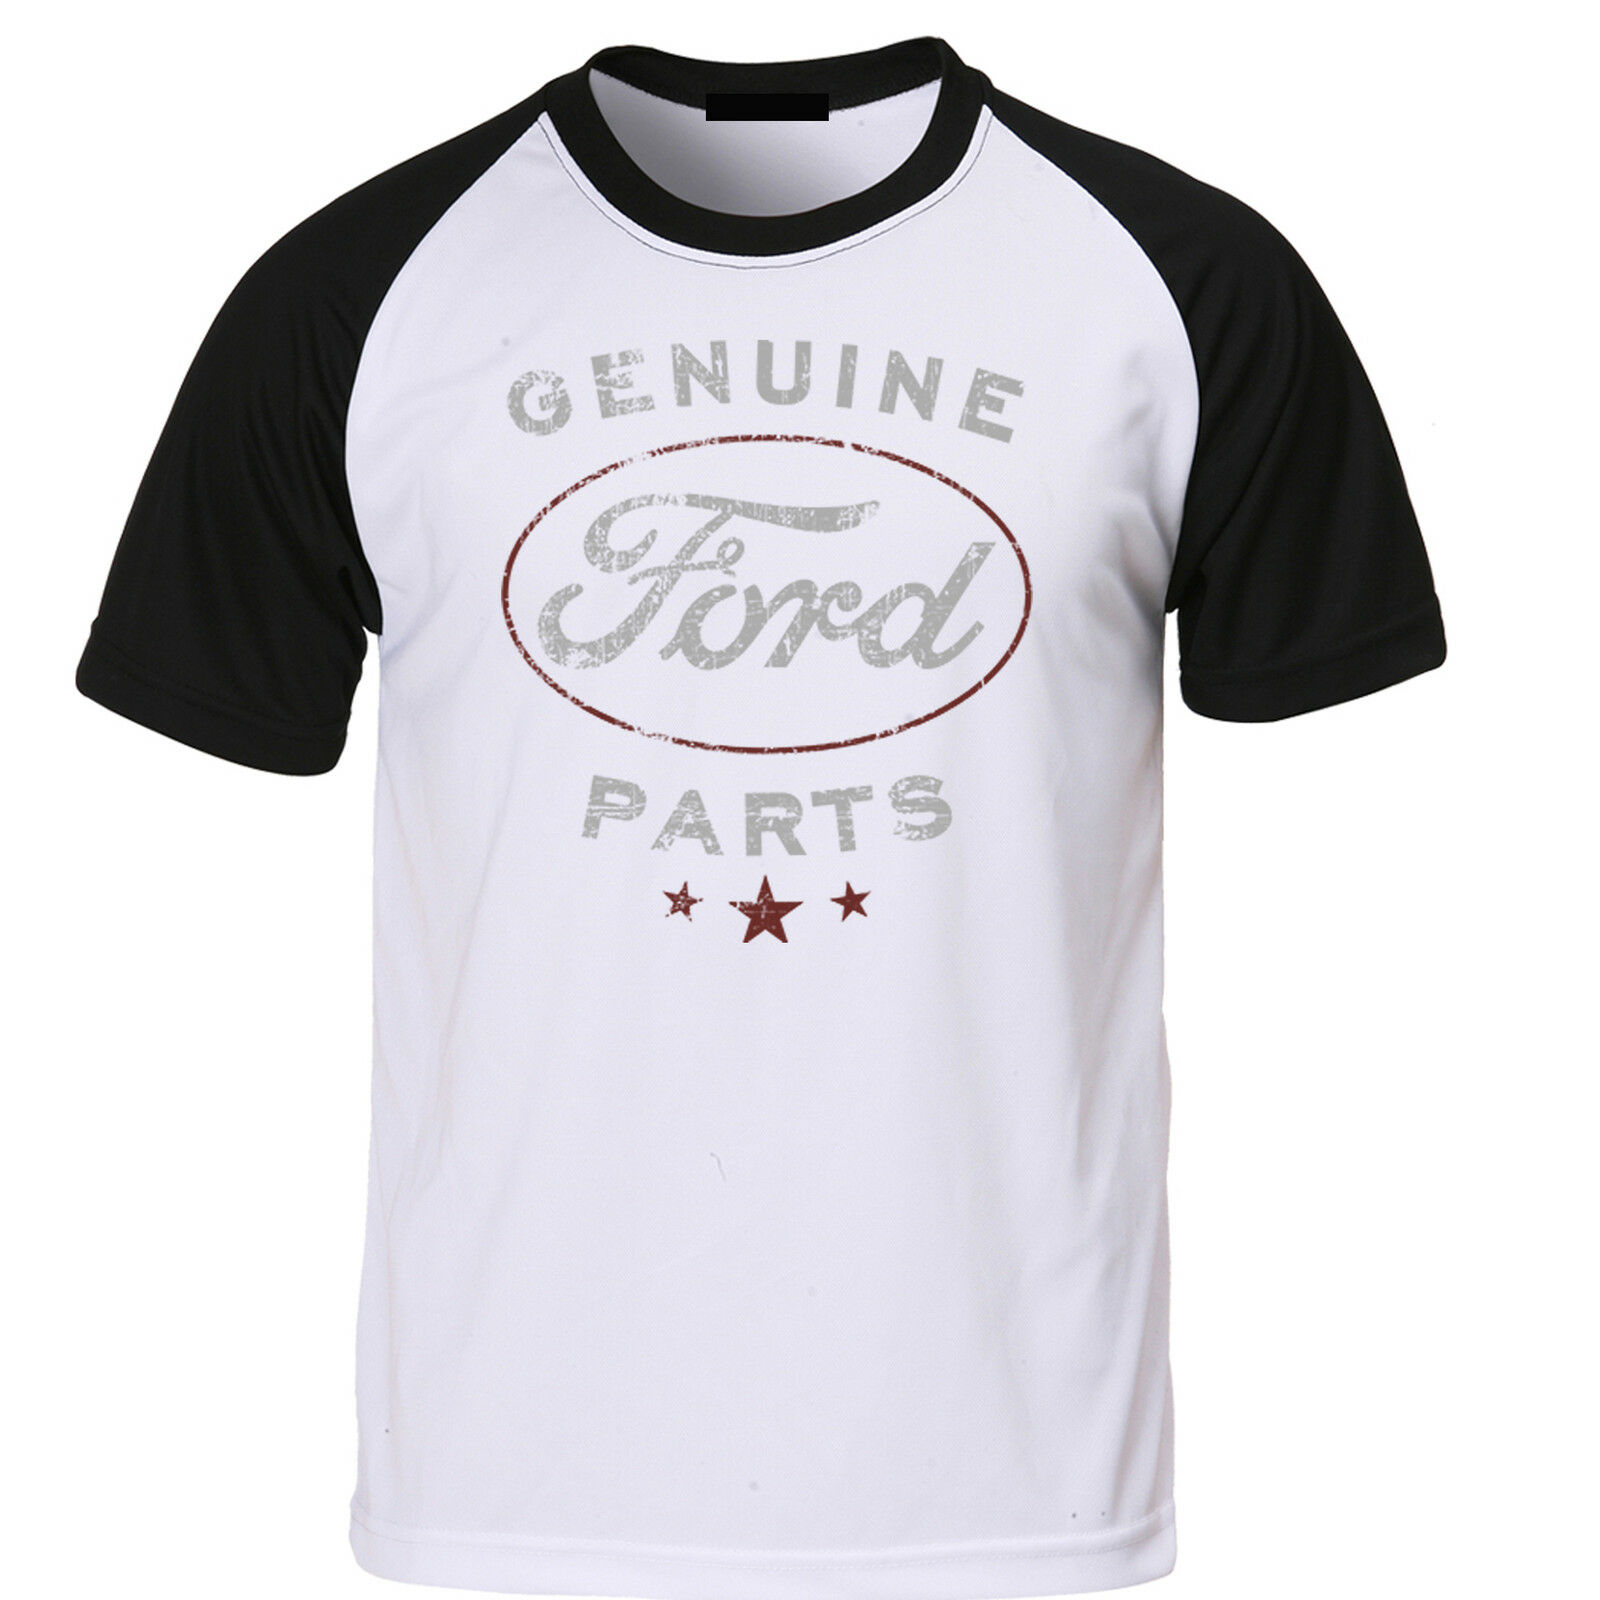 Mens Ford T Shirt Logo Genuine Parts Service American Classic Muscle Car Shirts